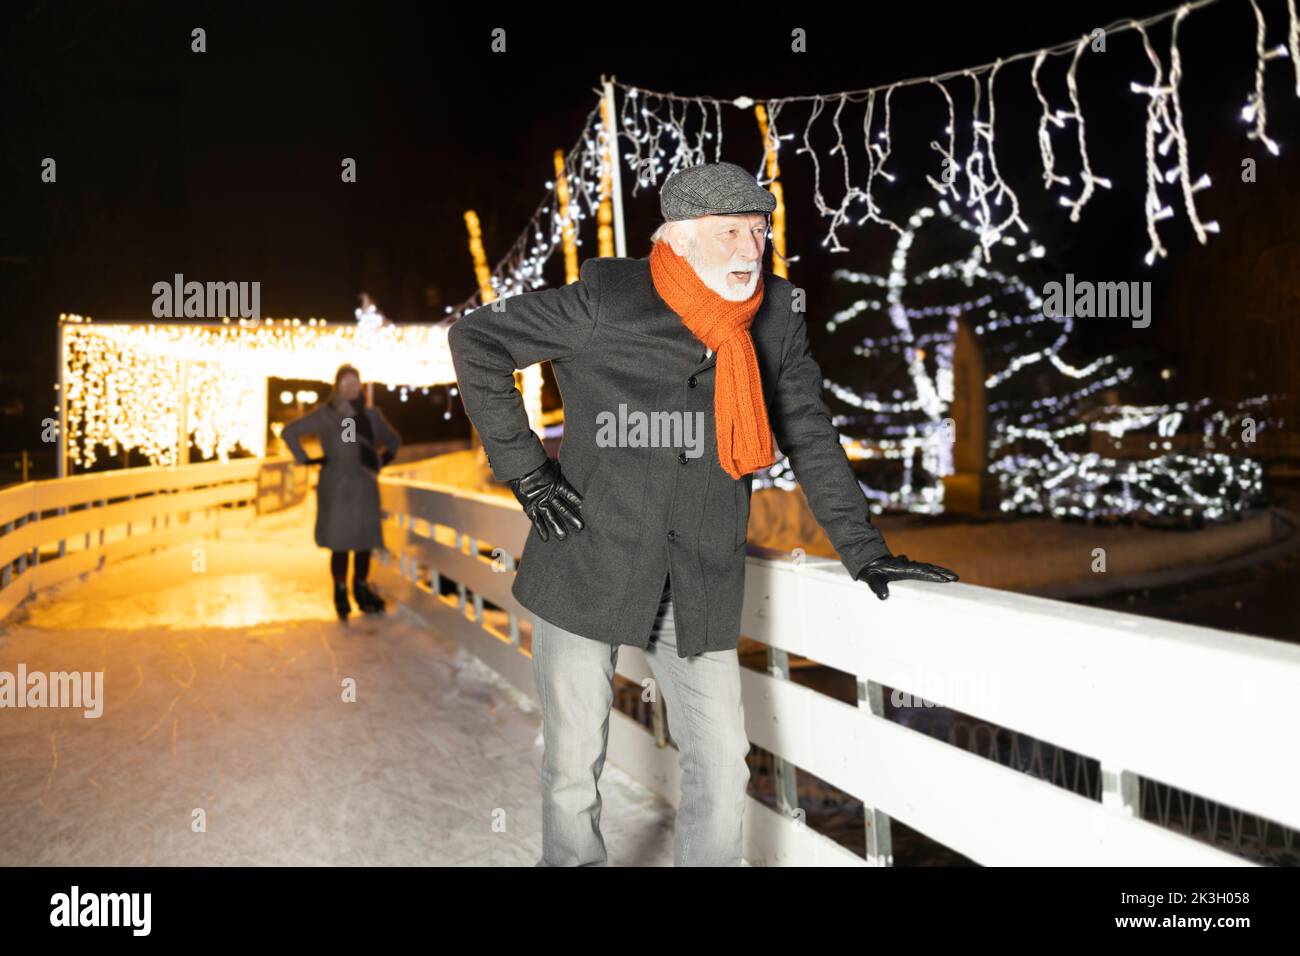 Older man skating on ice and having fun during Christmas and winter time Stock Photo